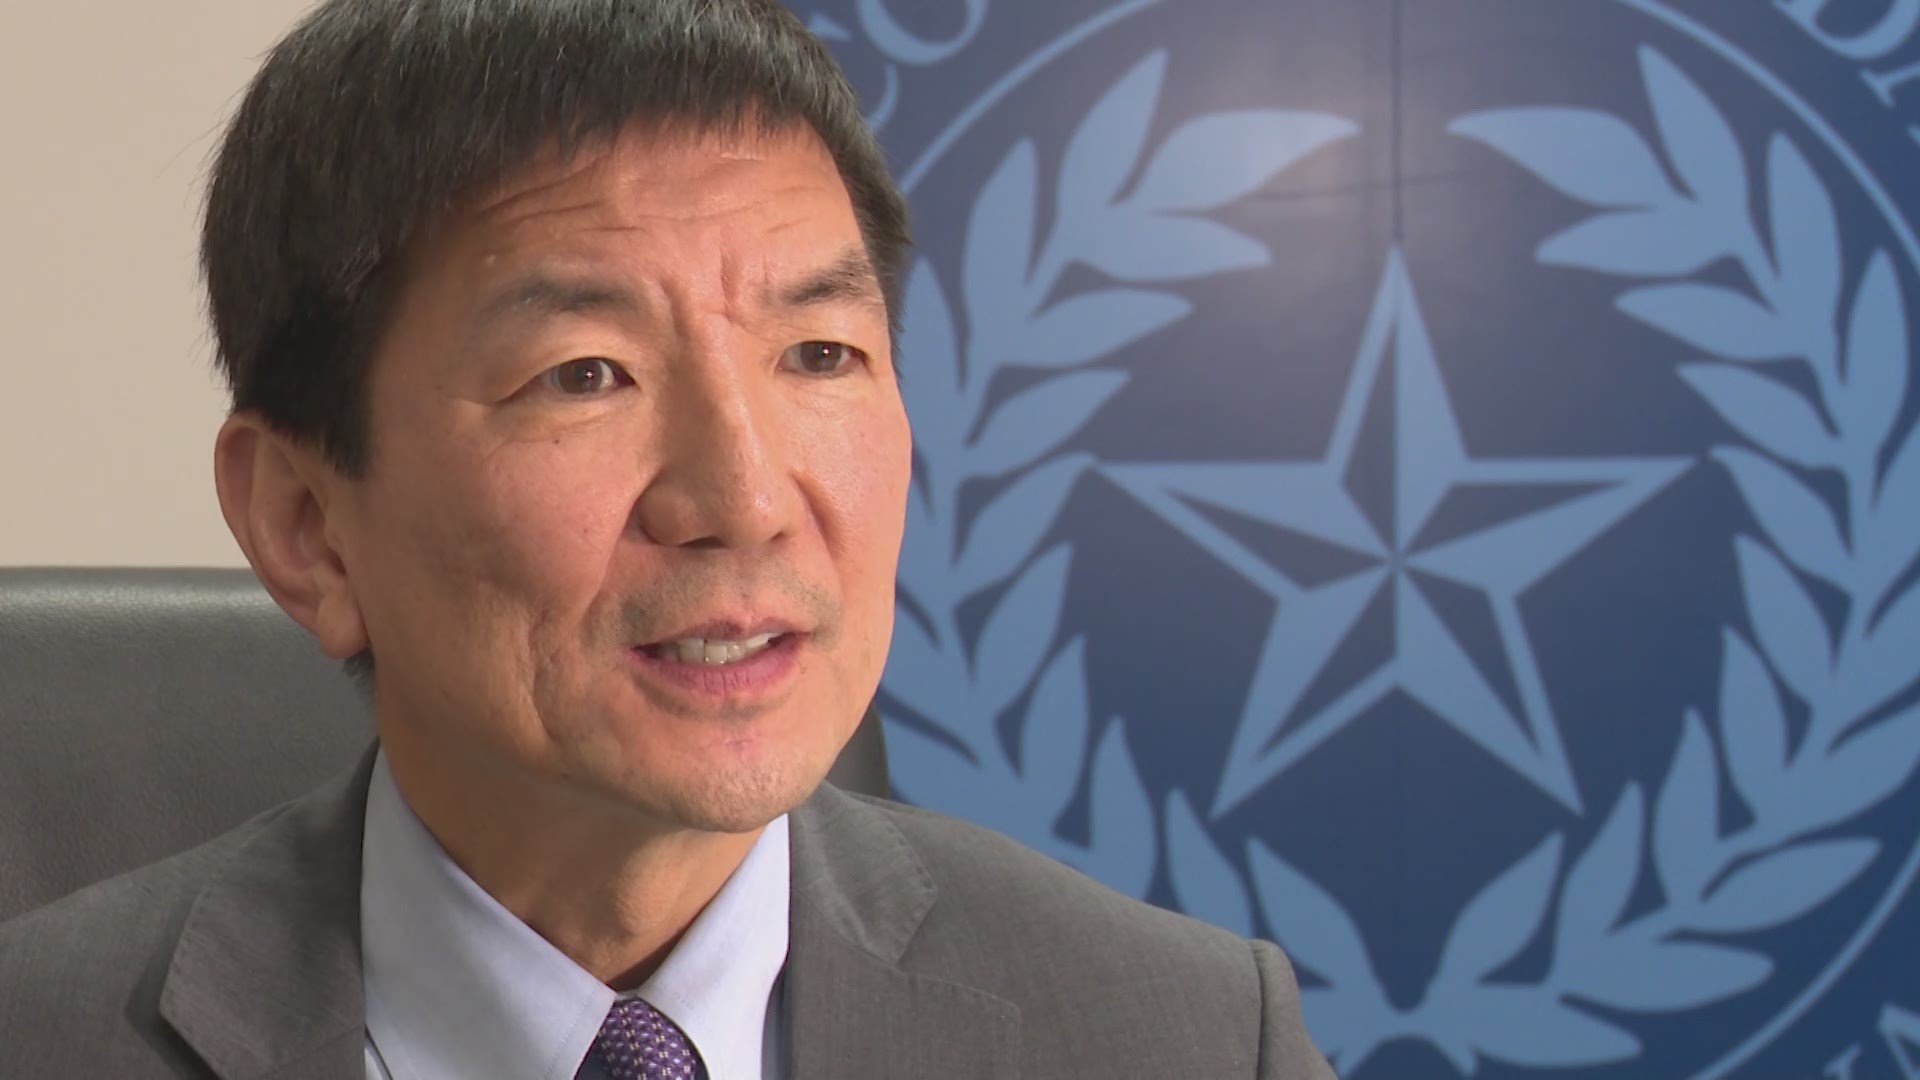 DCHHS Director Dr. Philip Huang says the department is taking the risk of an outbreak very seriously and is preparing for any level of response that may be needed.